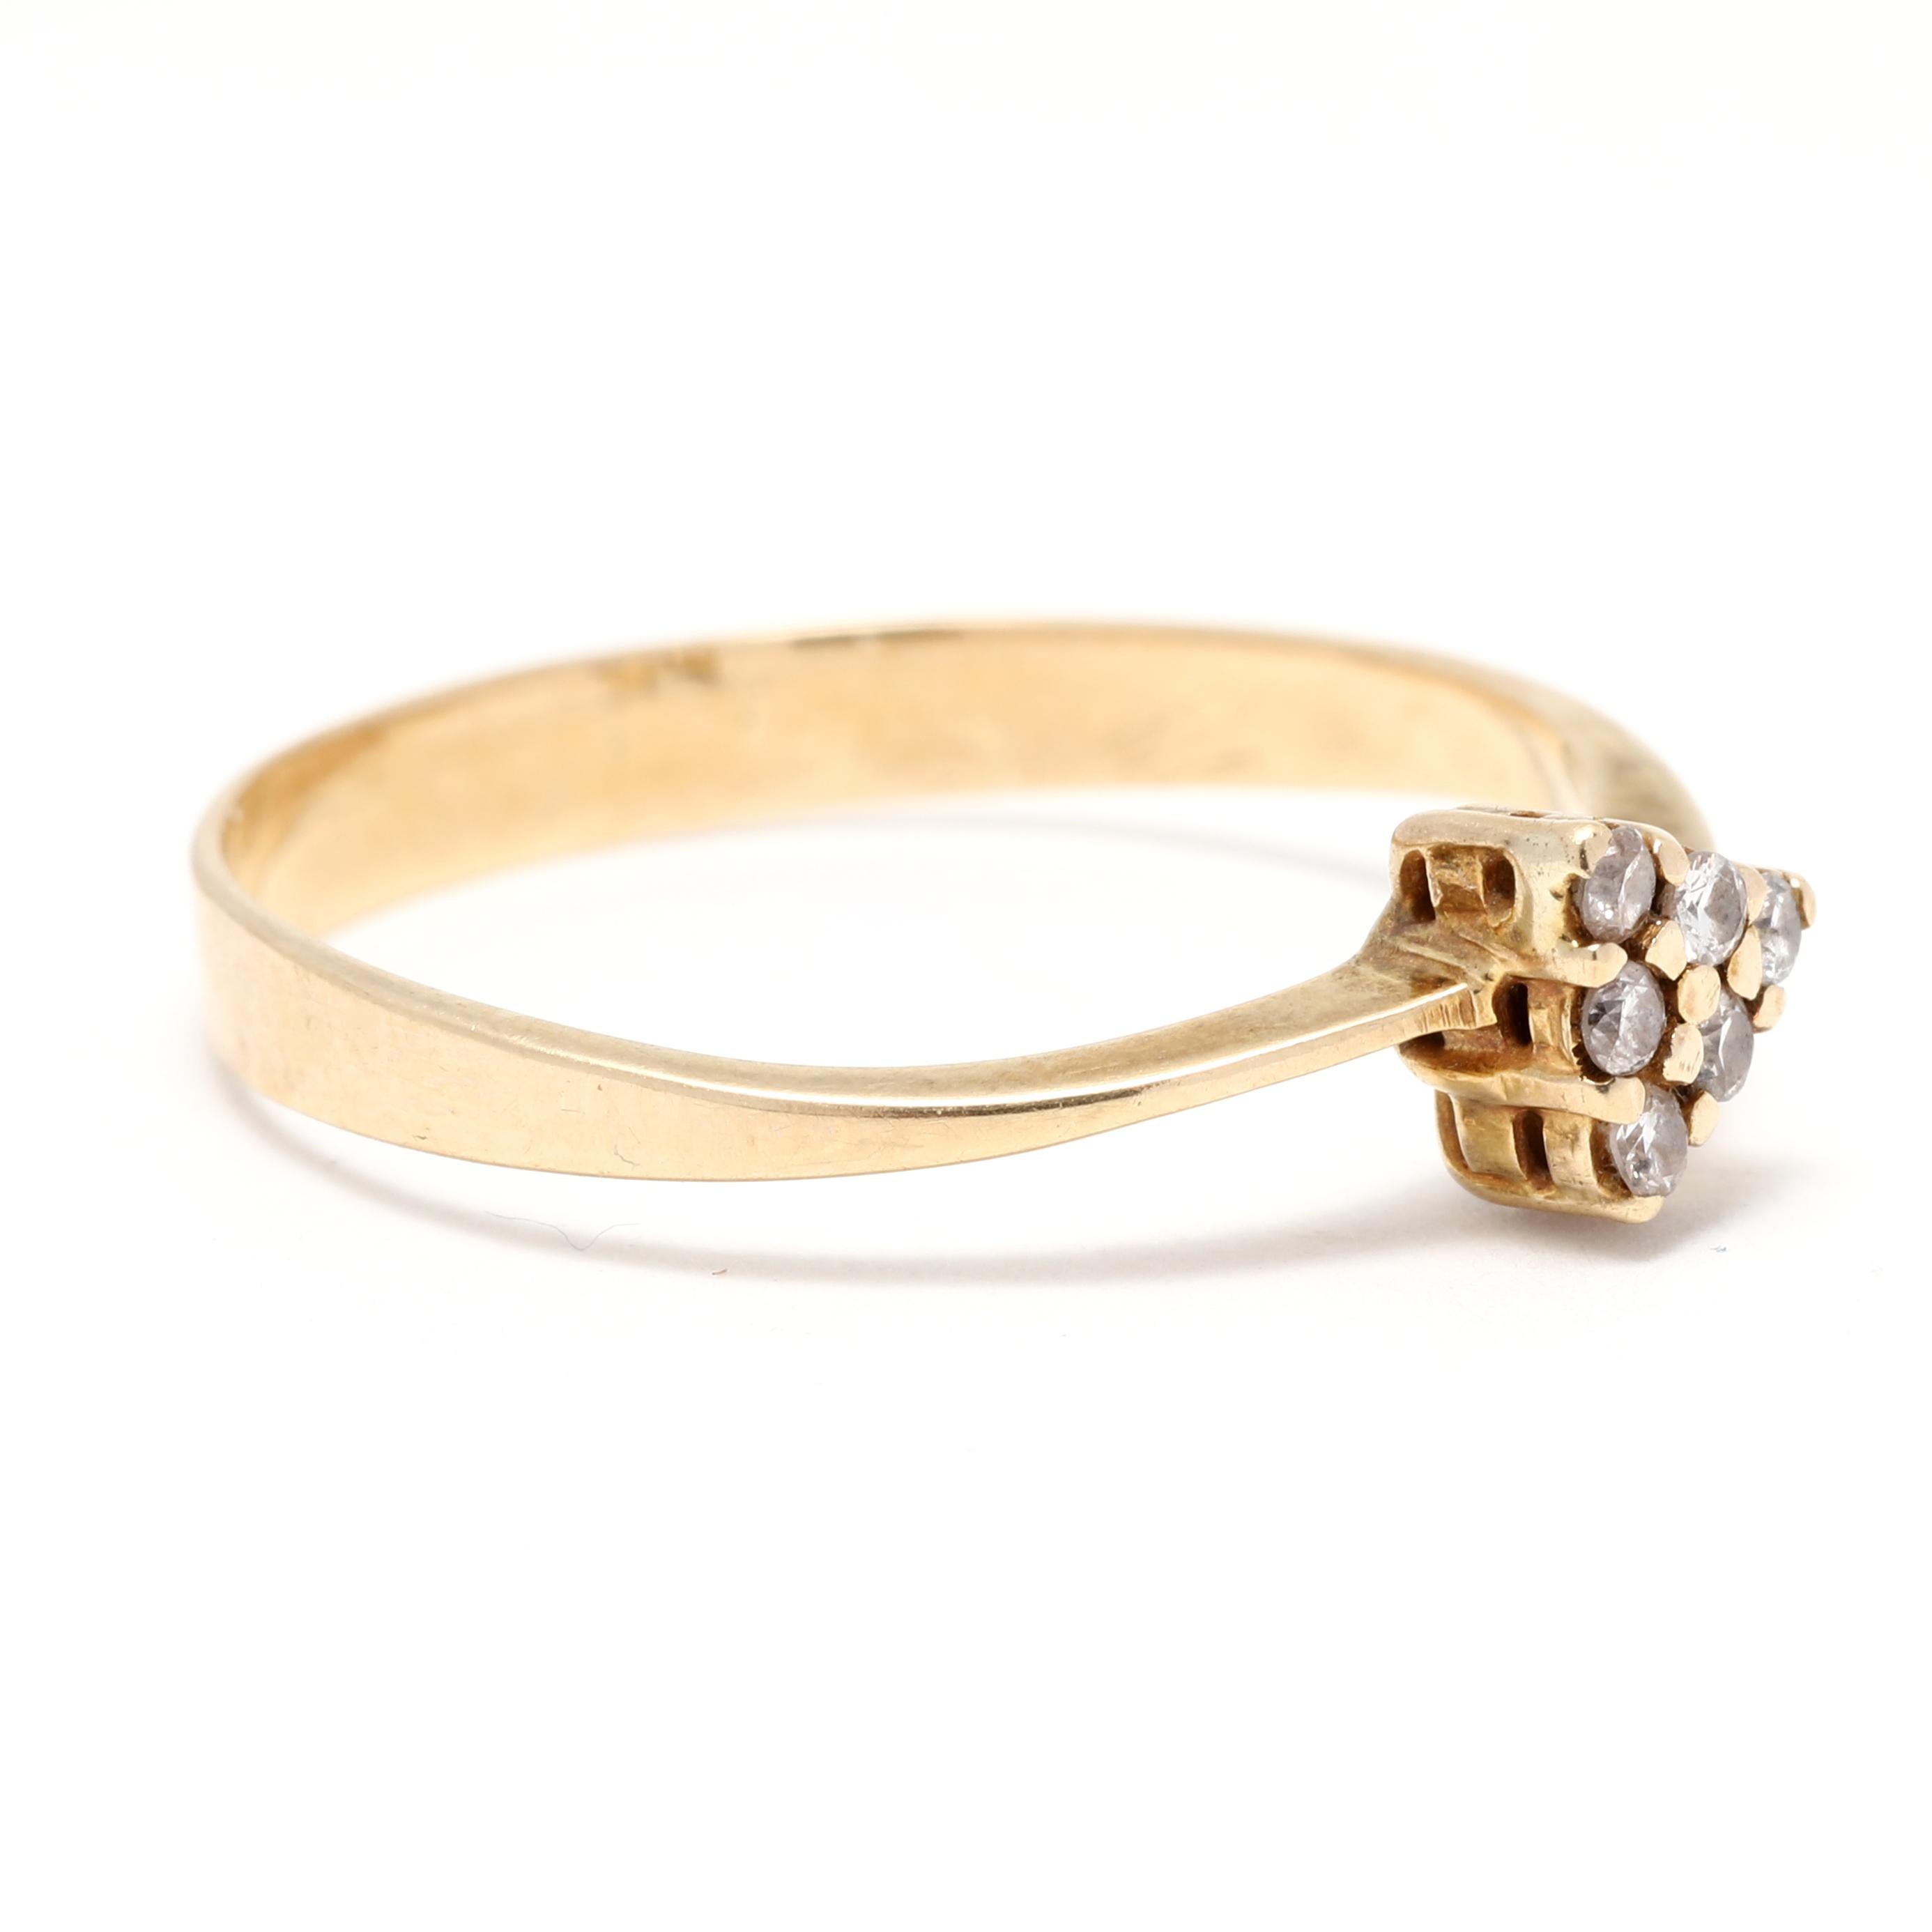 This sparkling 0.09ctw diamond arrow ring is crafted from 14k yellow gold. With its simple yet stunning design, this ring is a perfect accessory for any occasion. The round brilliant diamonds are carefully set in a sleek arrow-shaped design. The